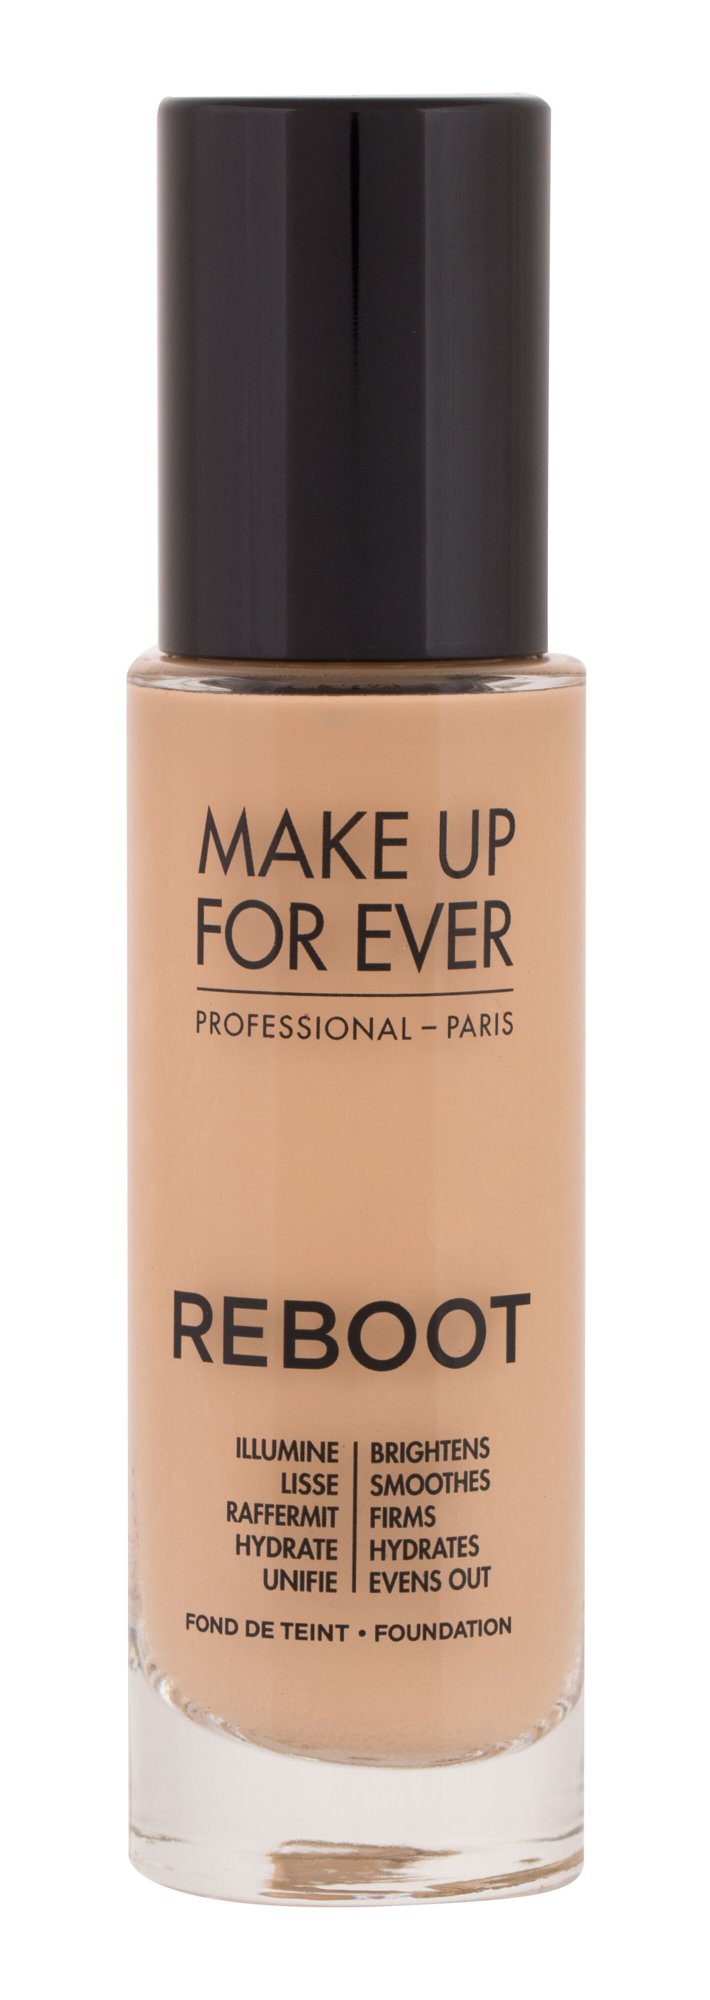 Make Up For Ever Reboot